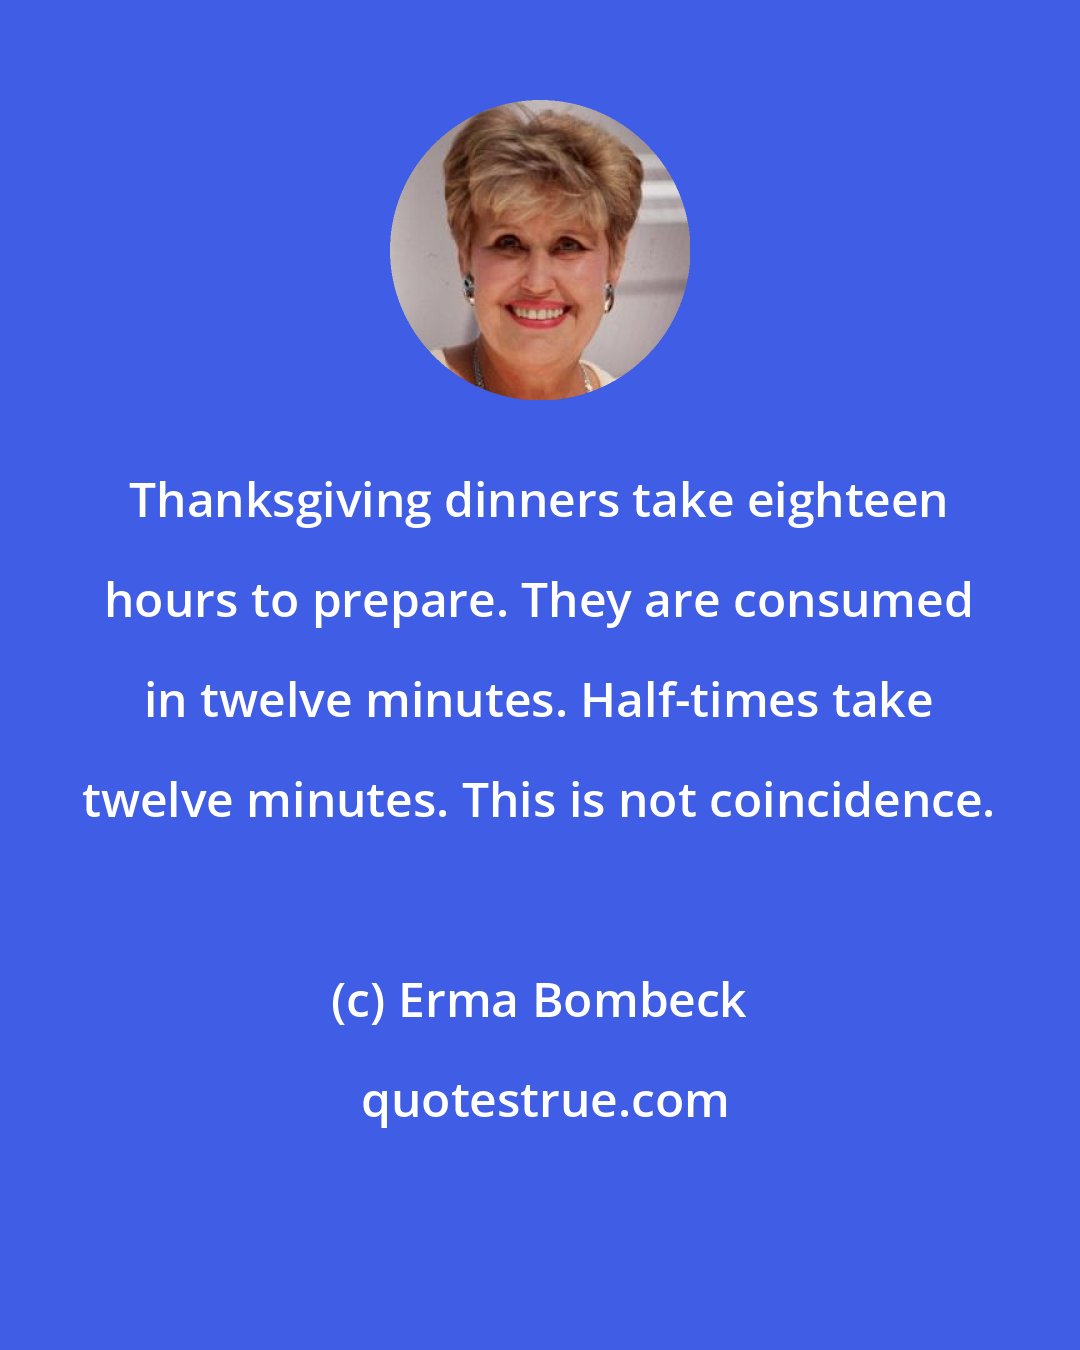 Erma Bombeck: Thanksgiving dinners take eighteen hours to prepare. They are consumed in twelve minutes. Half-times take twelve minutes. This is not coincidence.